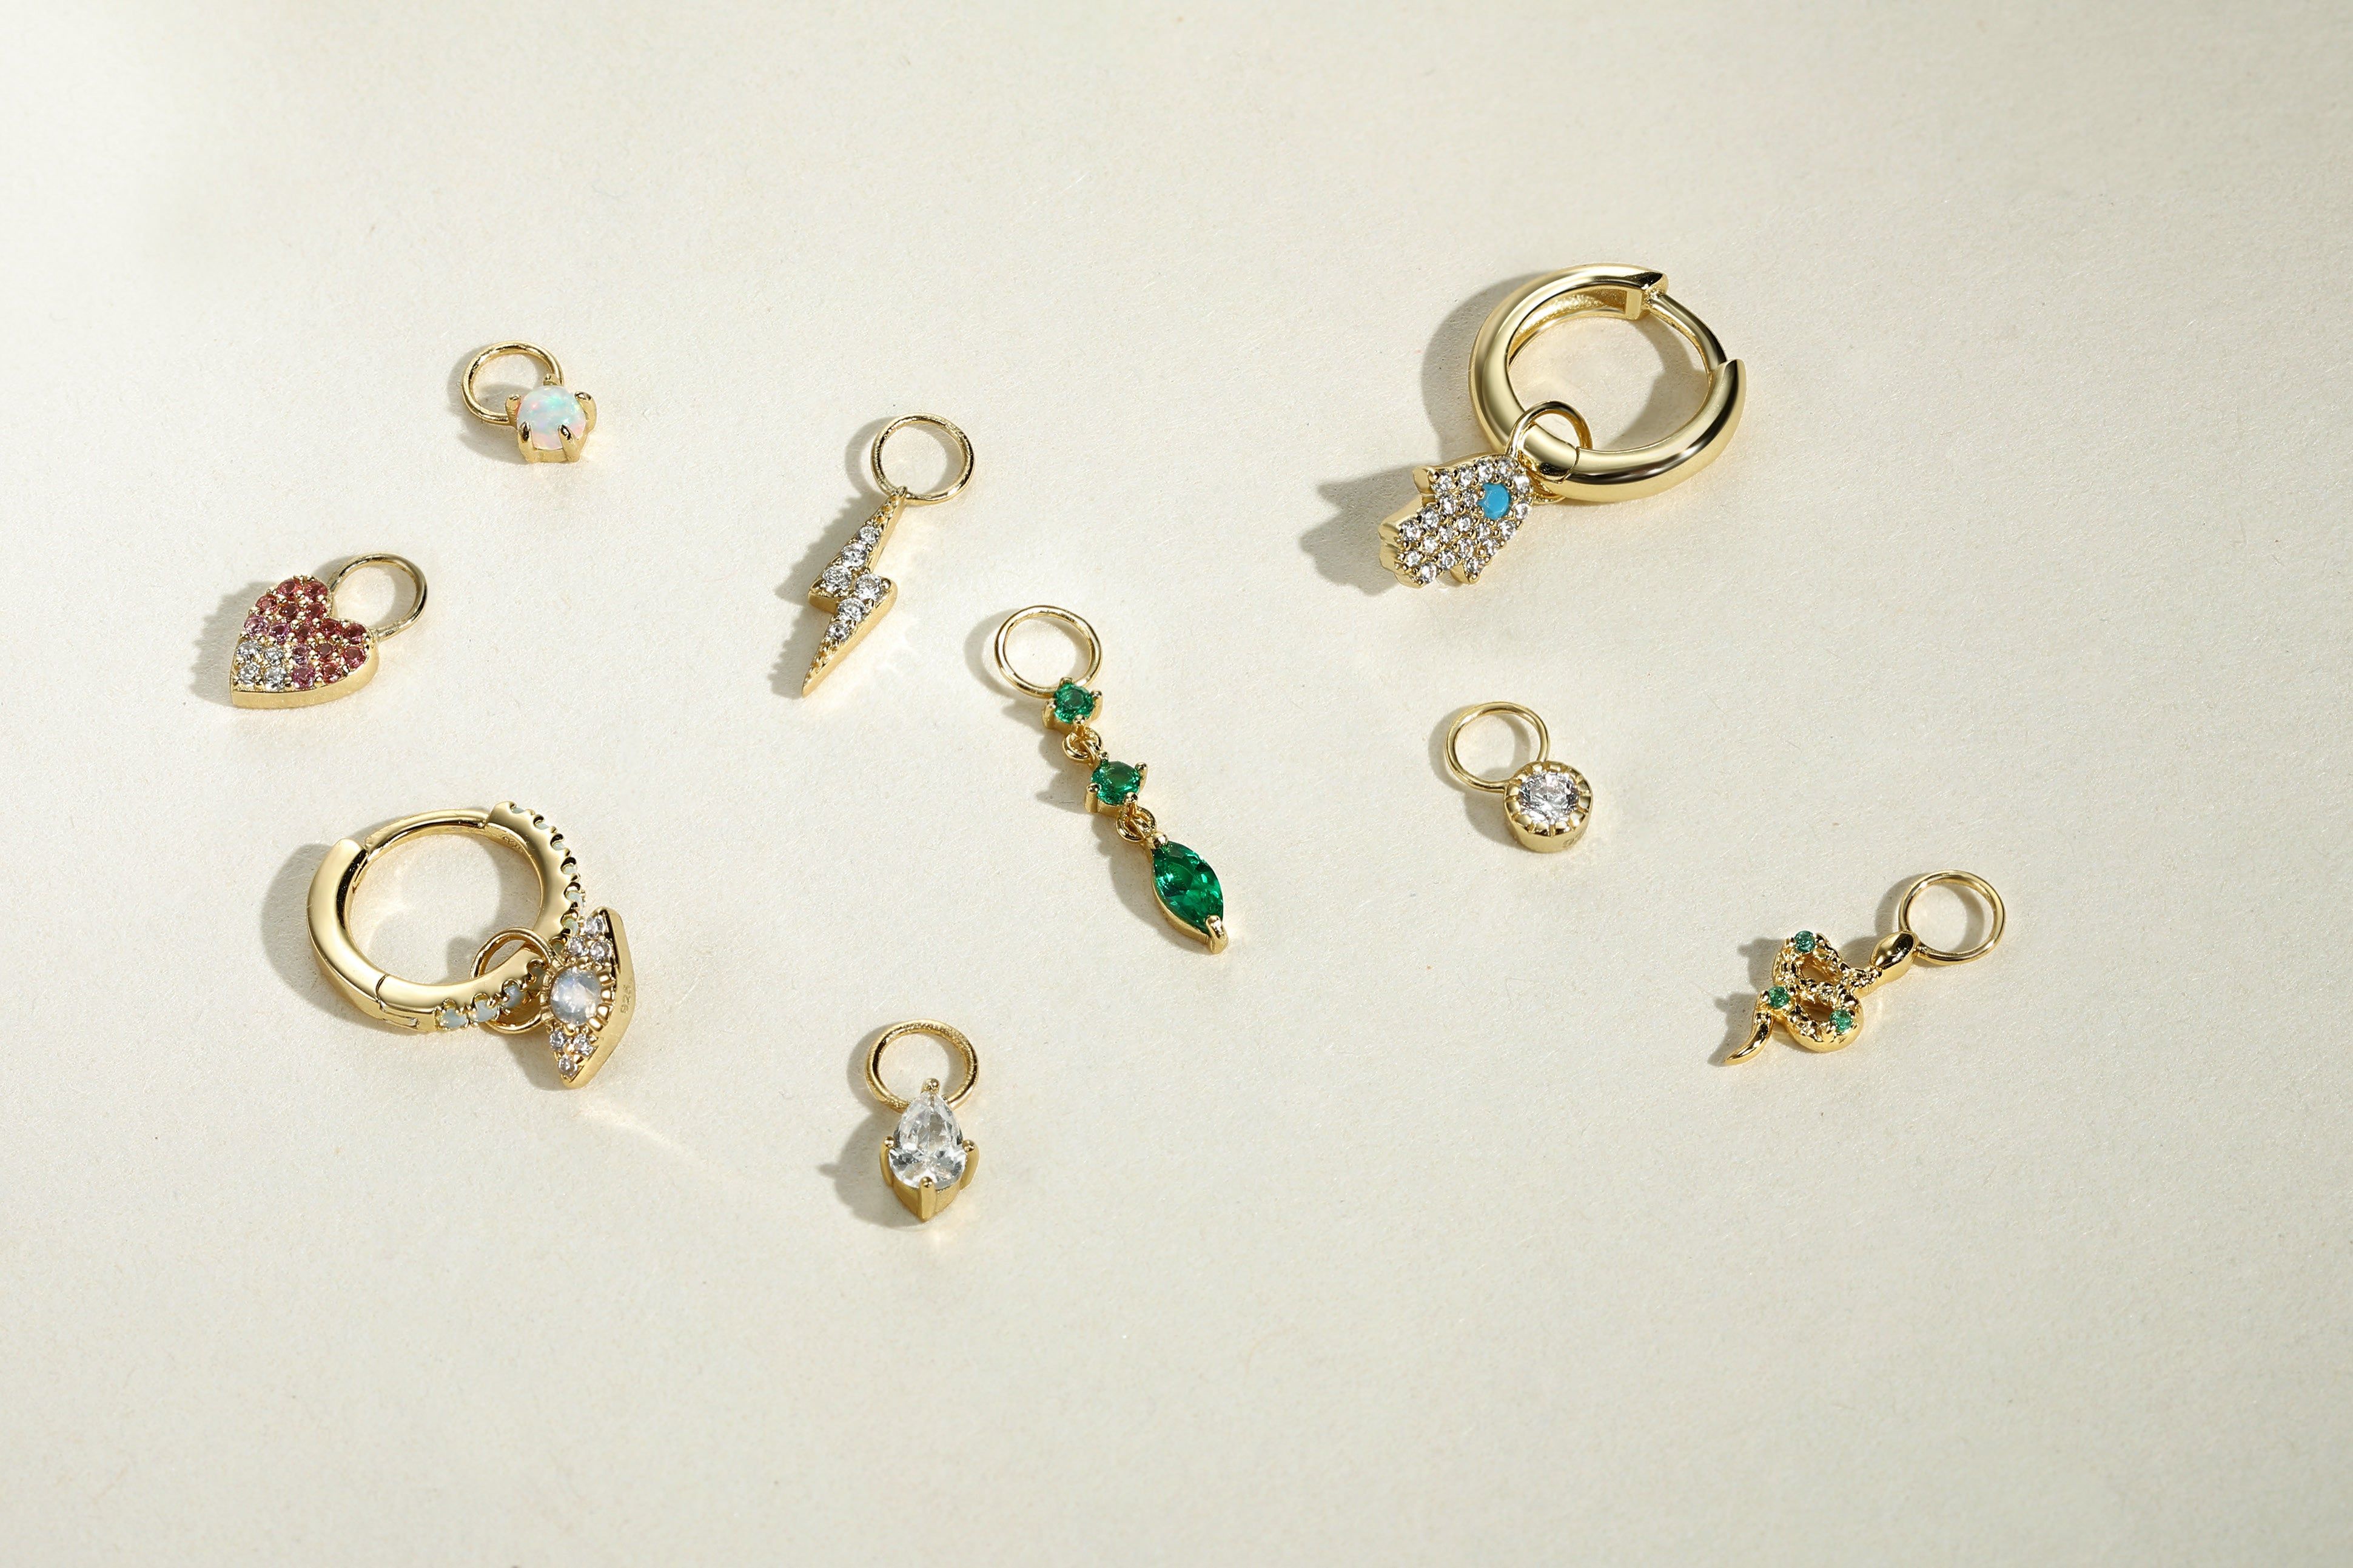 a collection of jewelry on a white surface